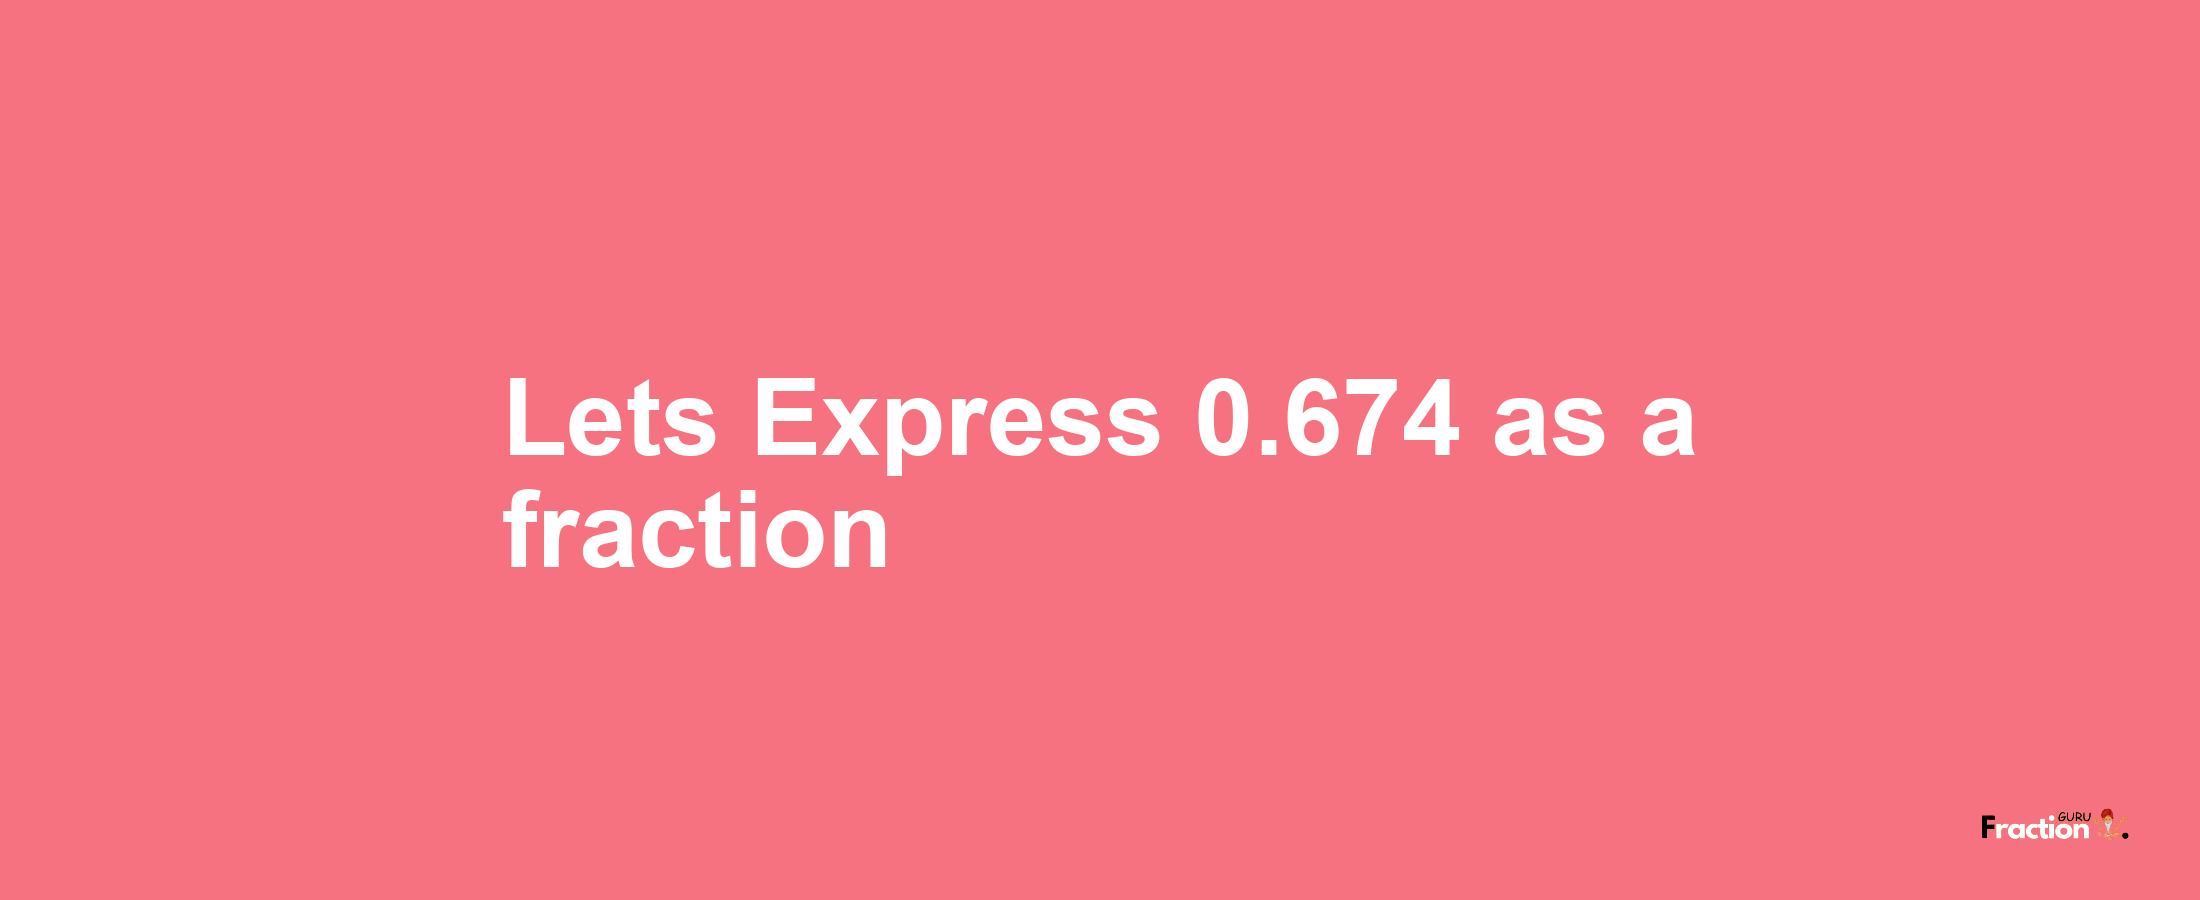 Lets Express 0.674 as afraction